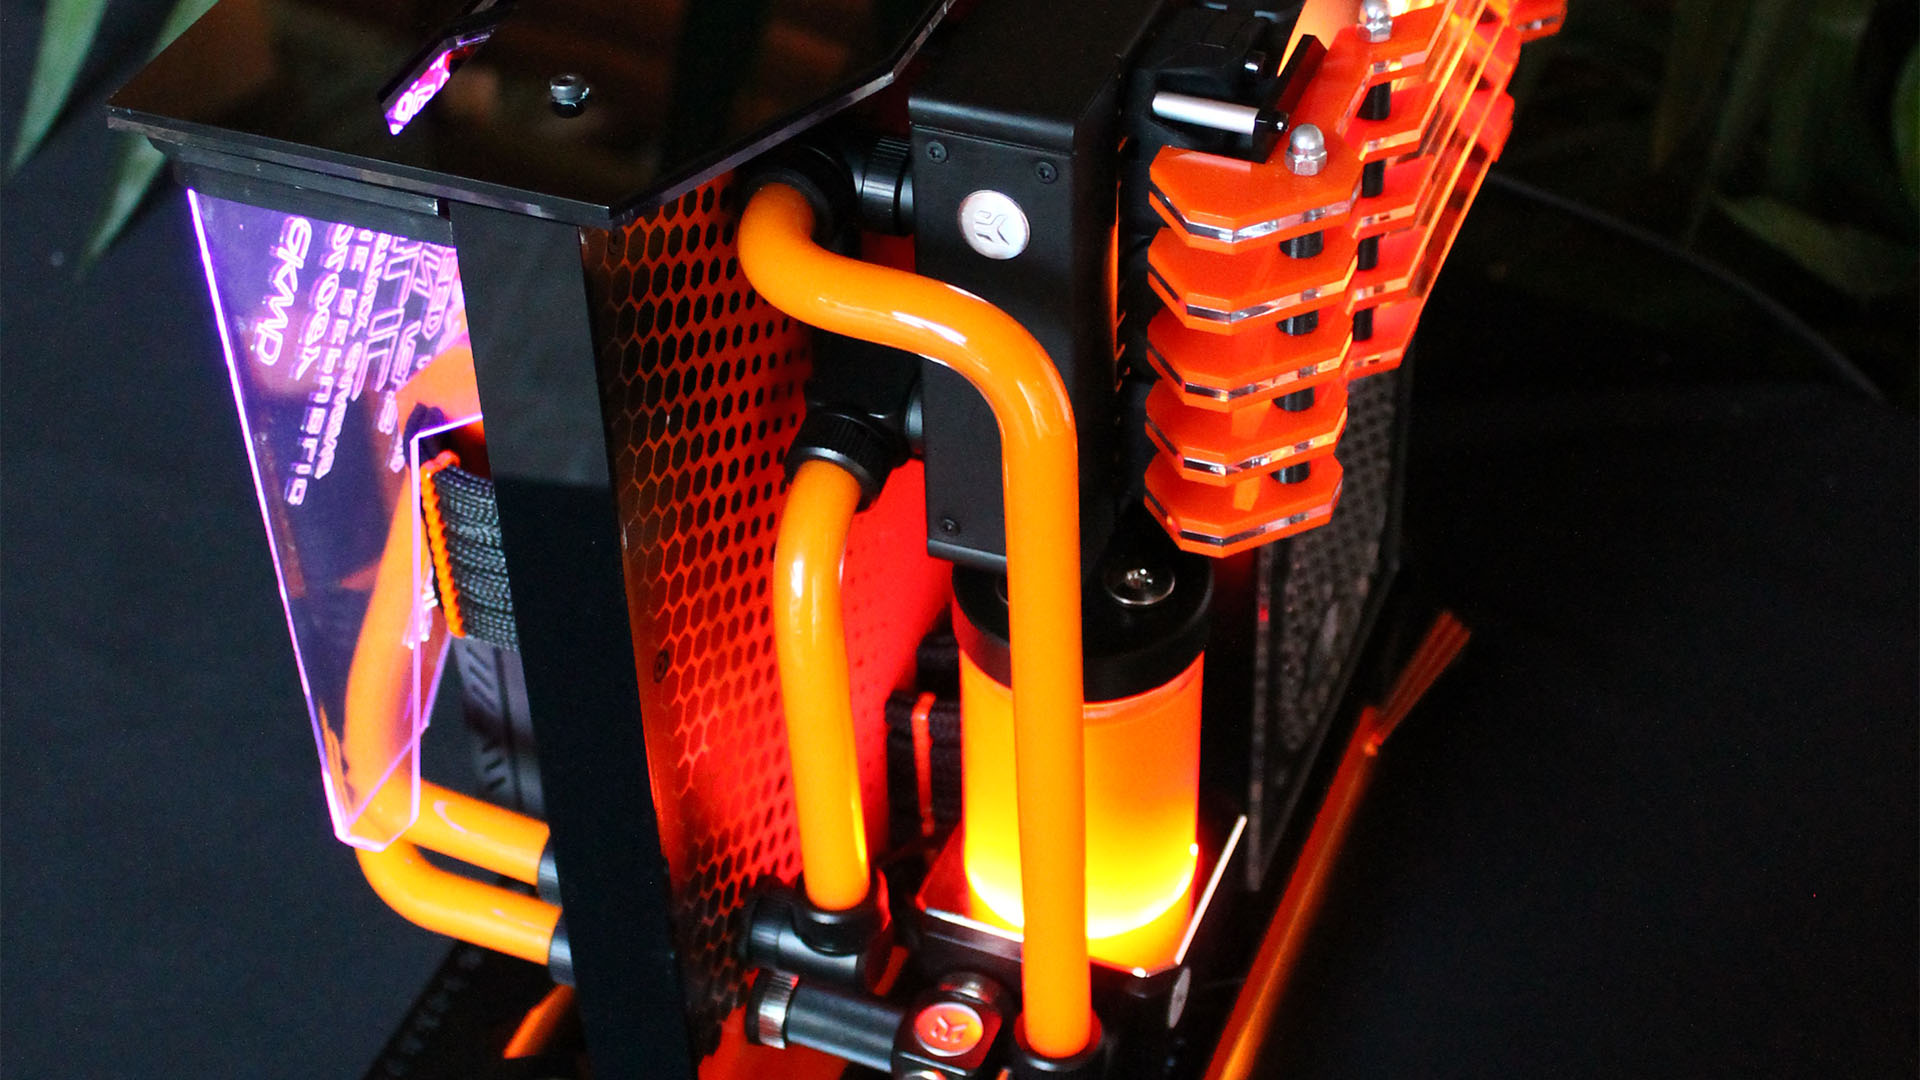 The back of the ROG Pagoda gaming PC with orange coolant running through pipes